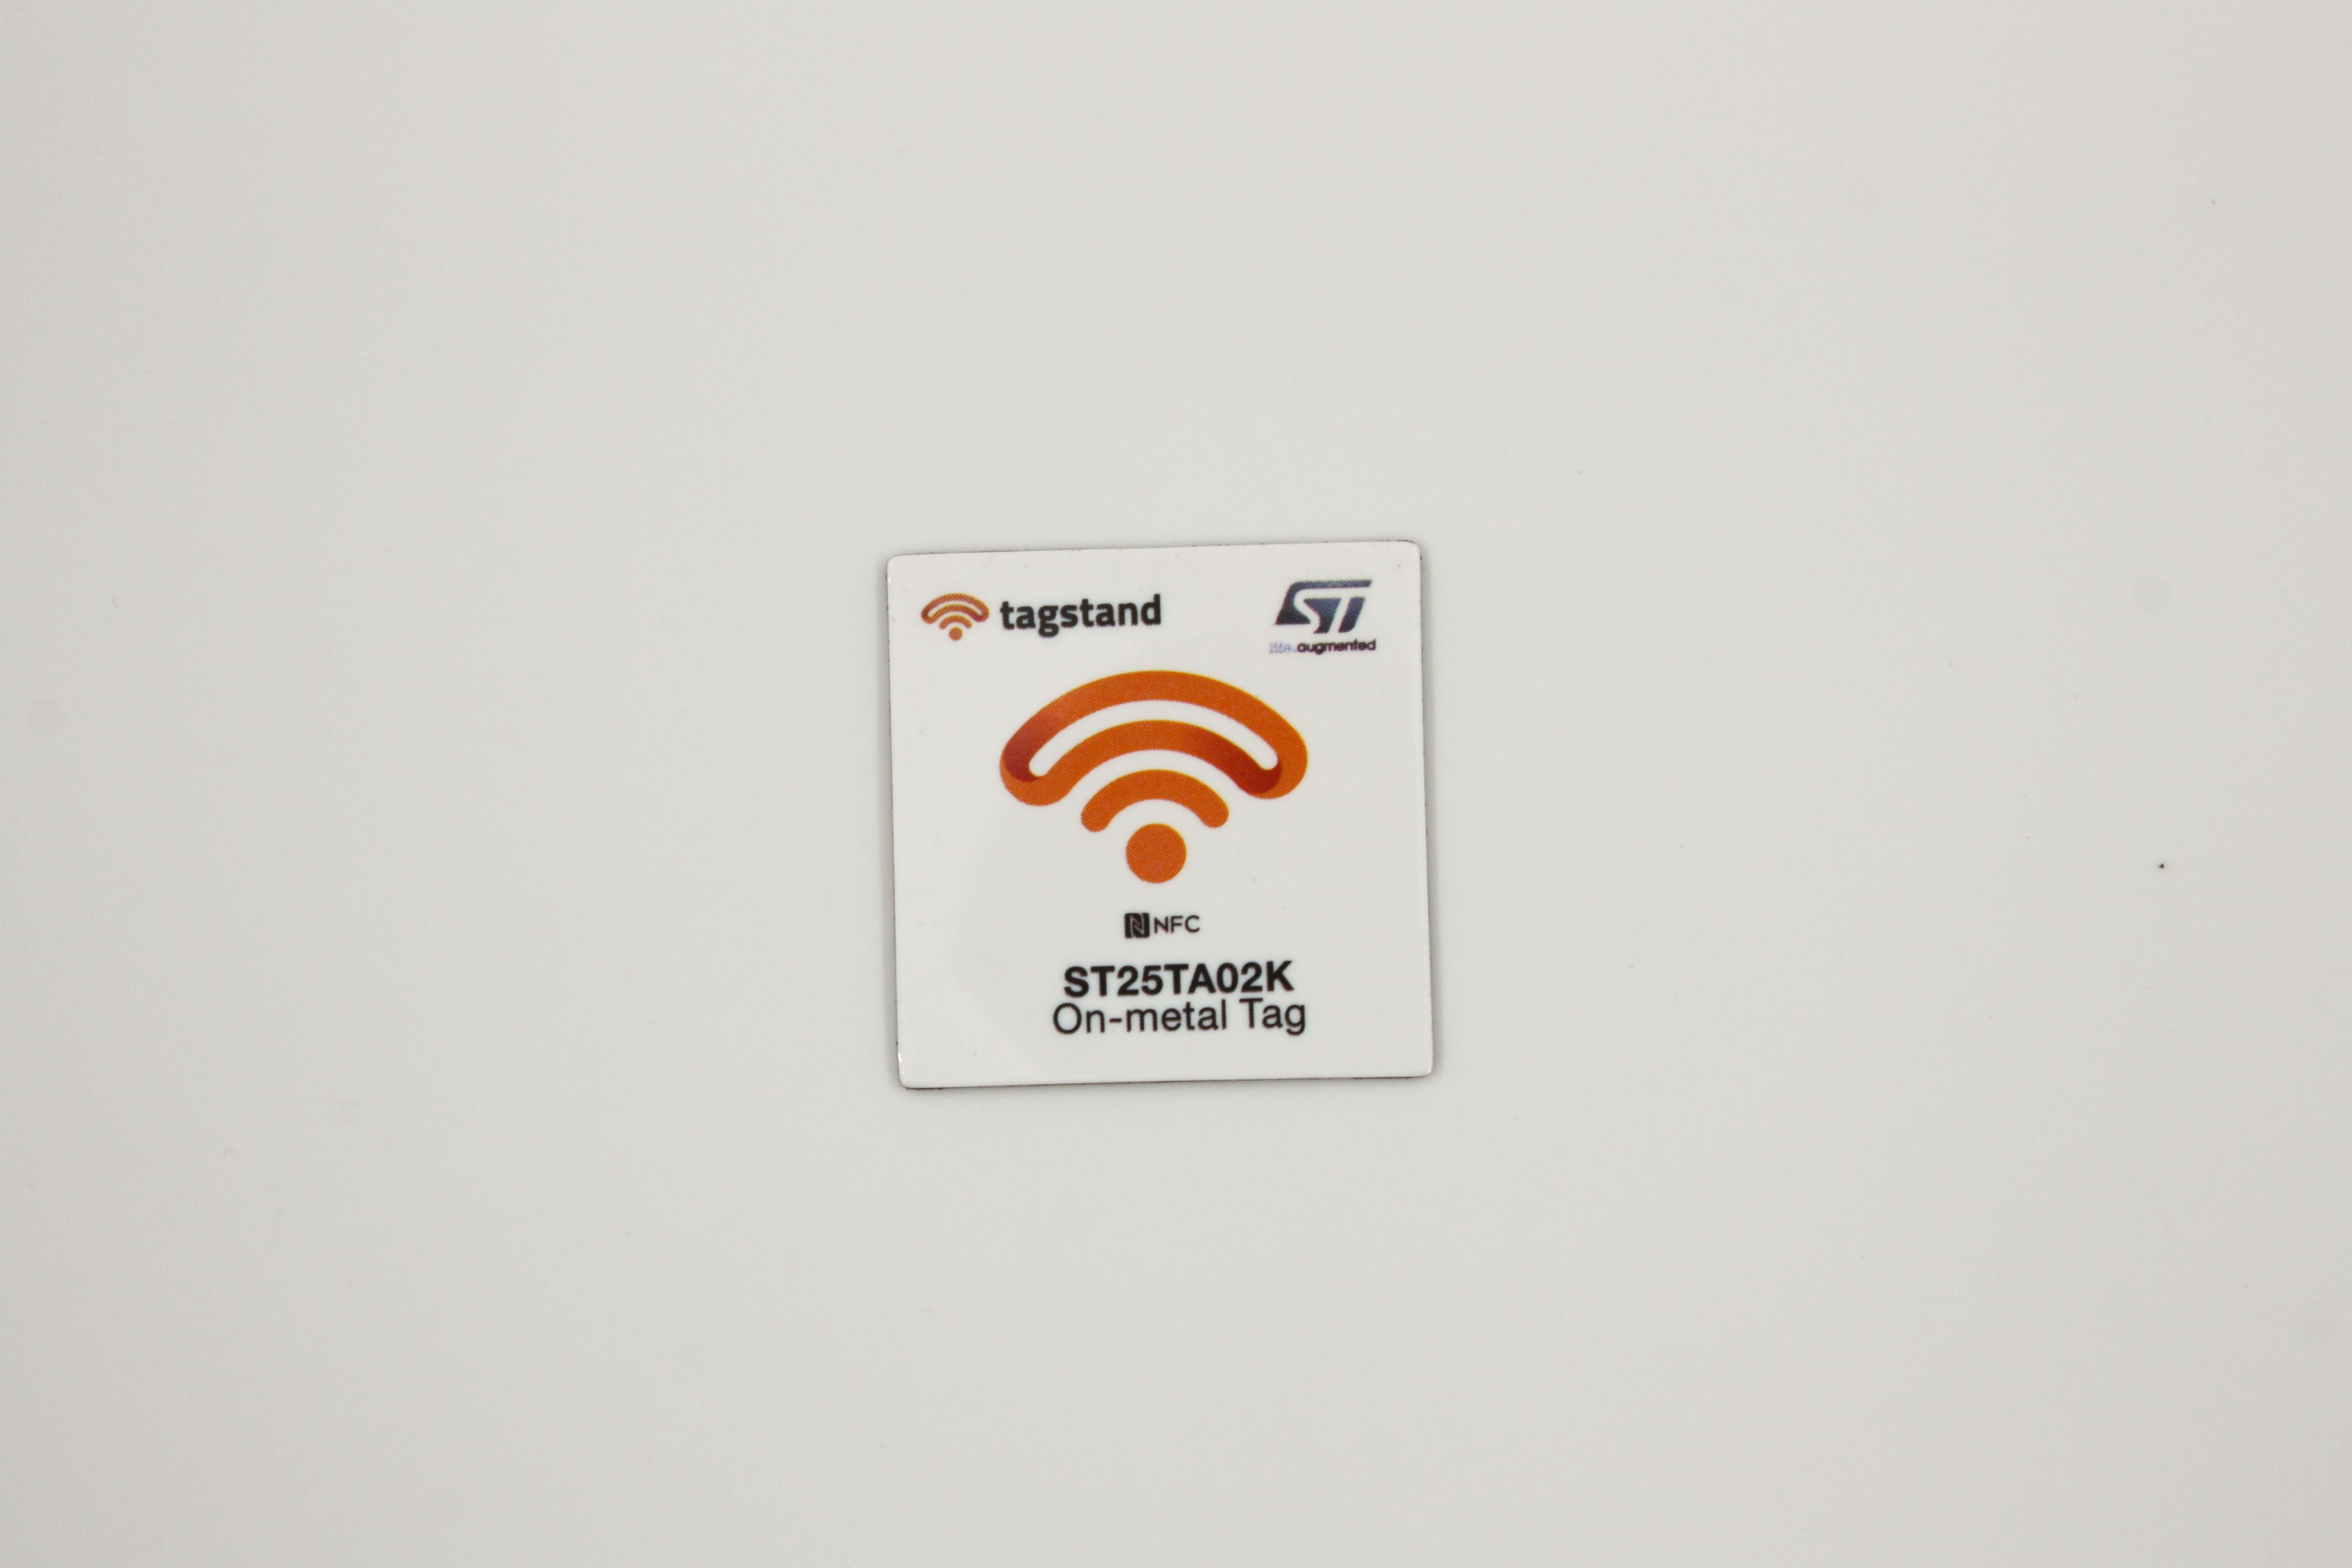 ST by Tagstand - Type 4, On-metal PET Sticker - 30mm square